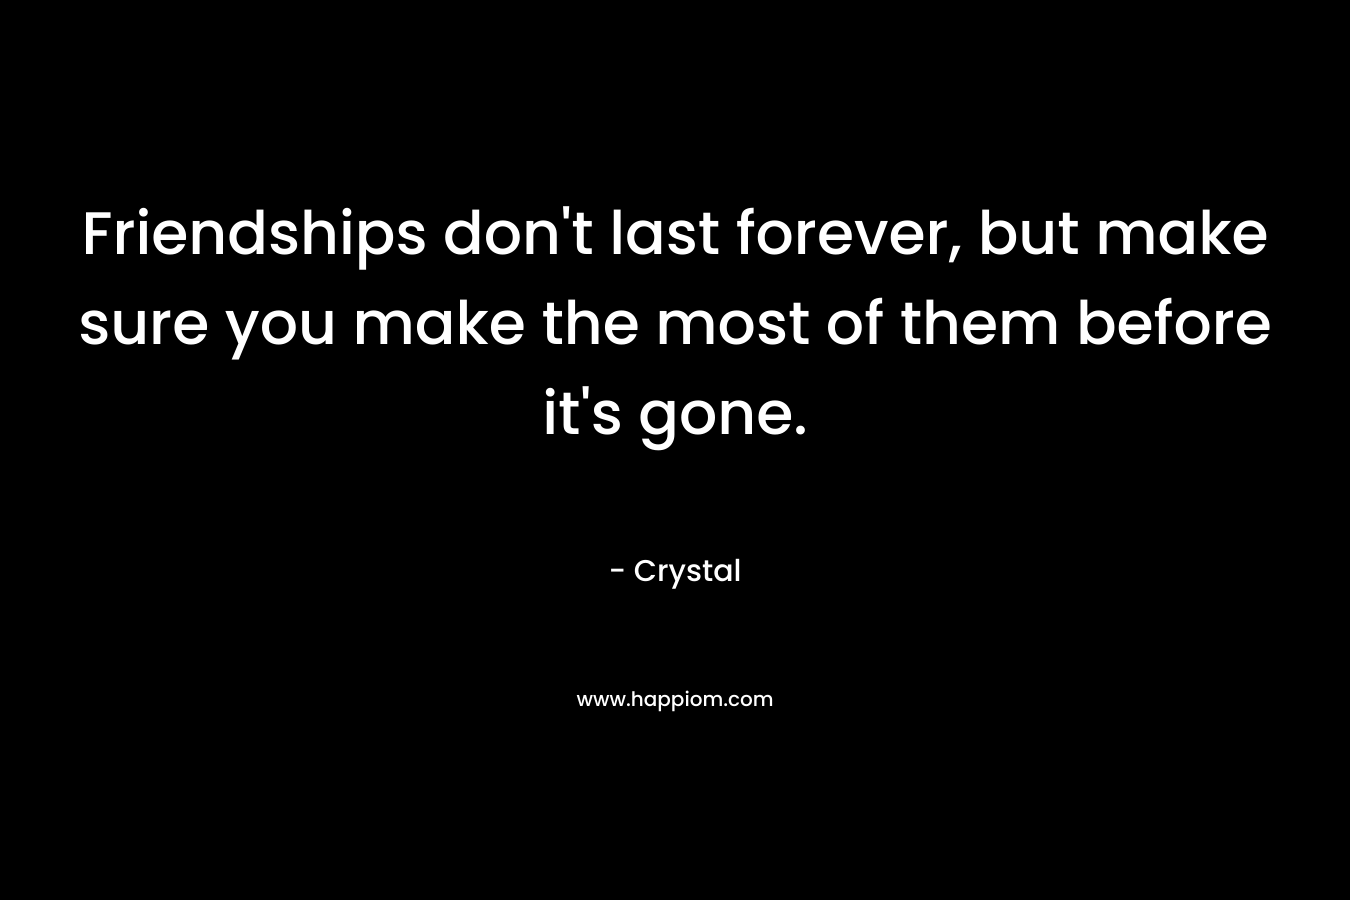 Friendships don’t last forever, but make sure you make the most of them before it’s gone. – Crystal